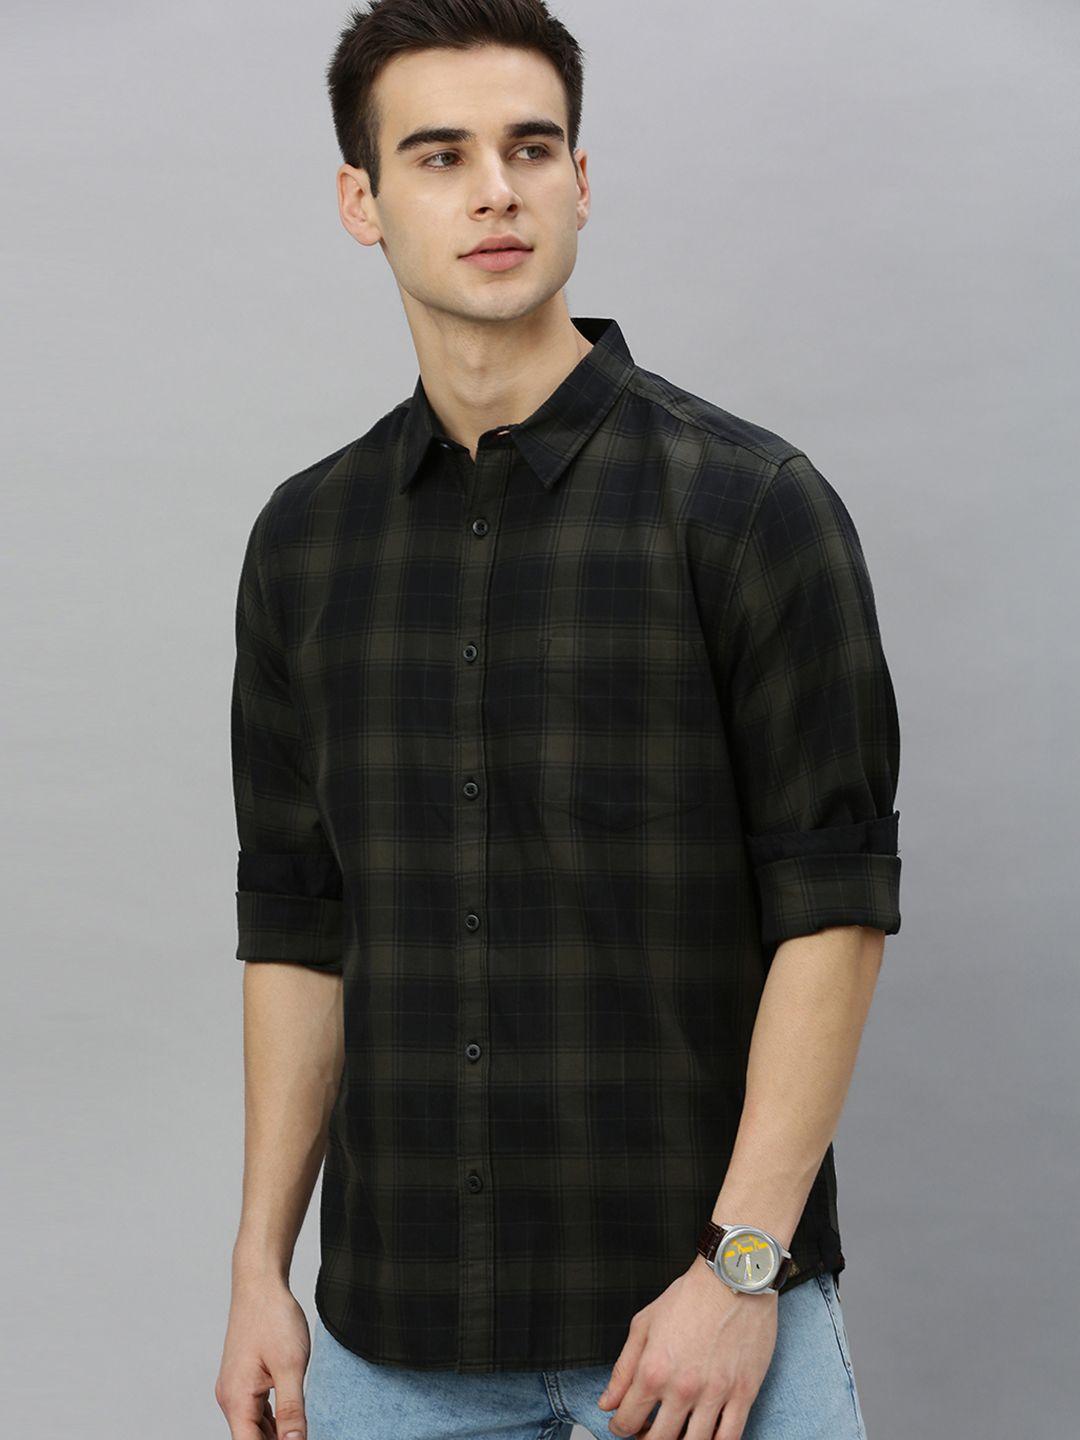 roadster-men-olive-green-&-black-checked-sustainable-casual-shirt